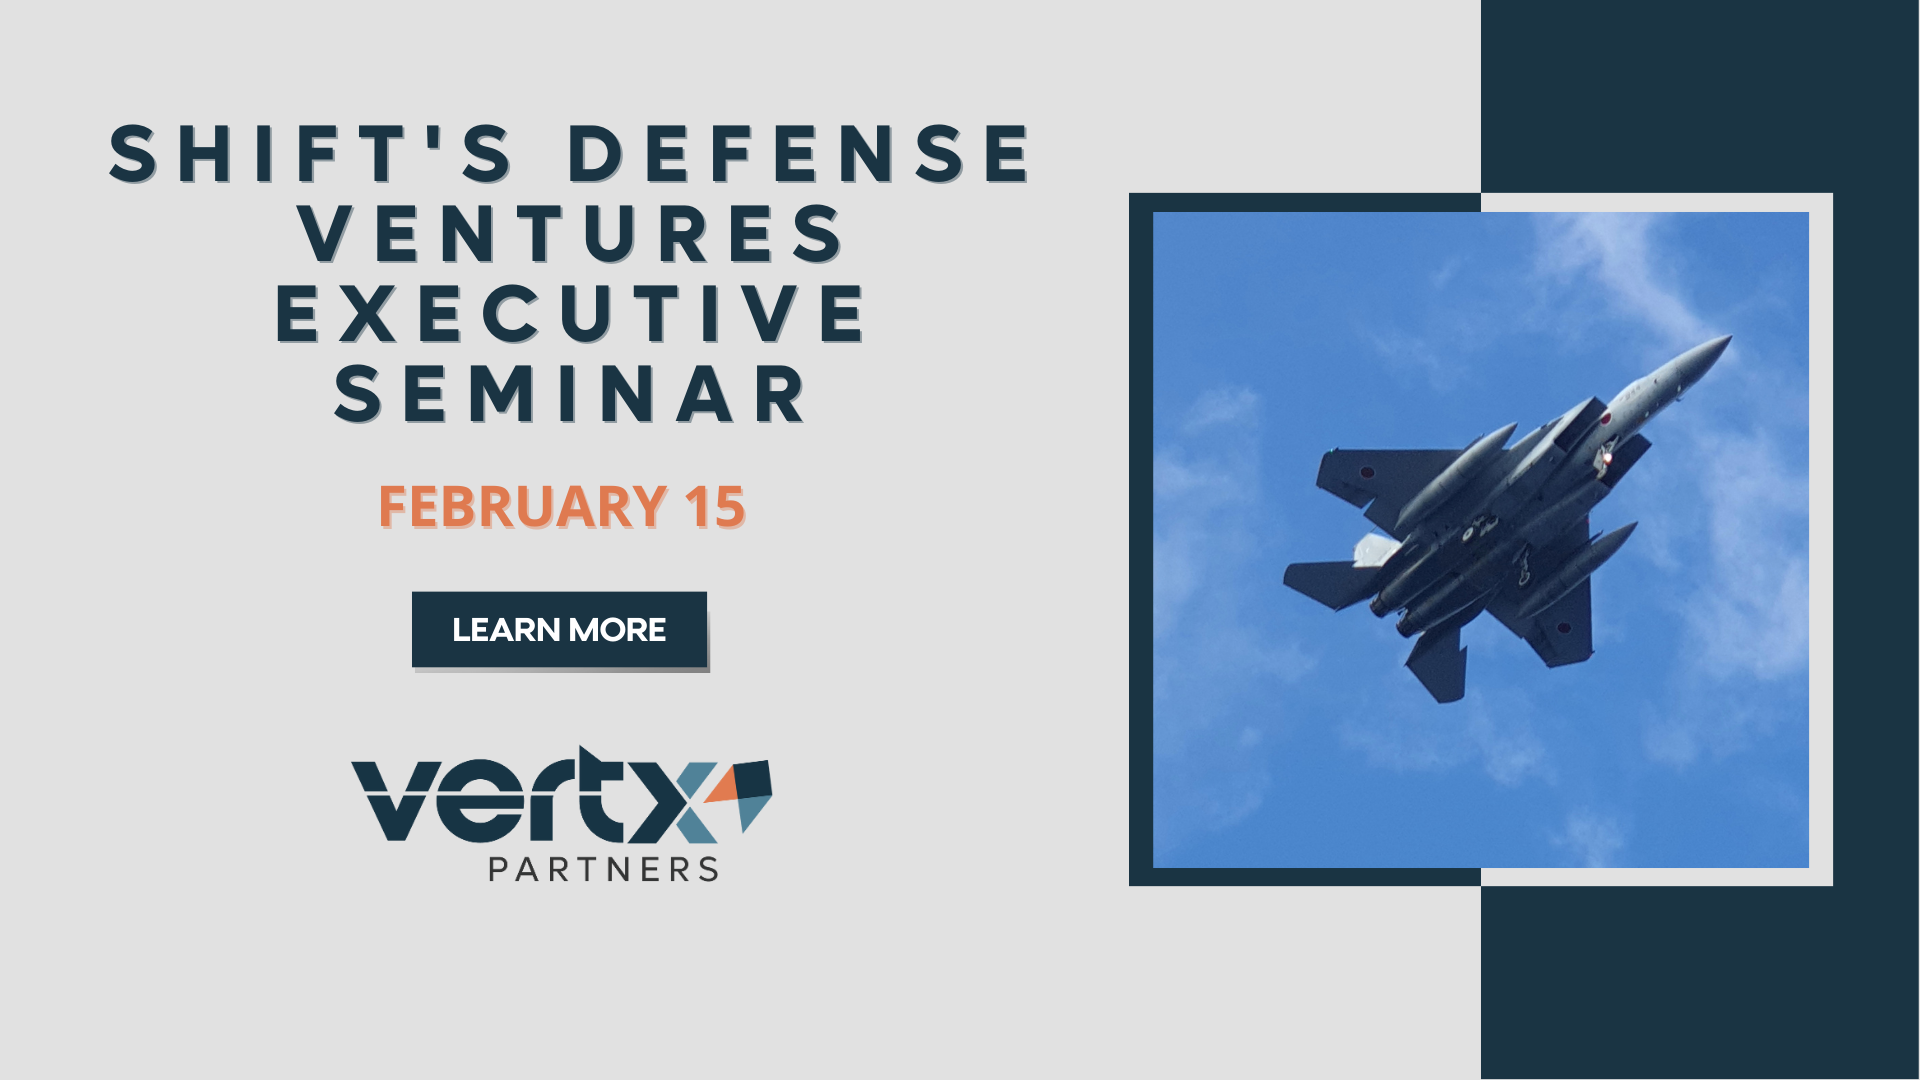 This graphic has the title Shift's defense ventures executive seminar with the date February 15th and a photo of a plane flying in the sky to the right.